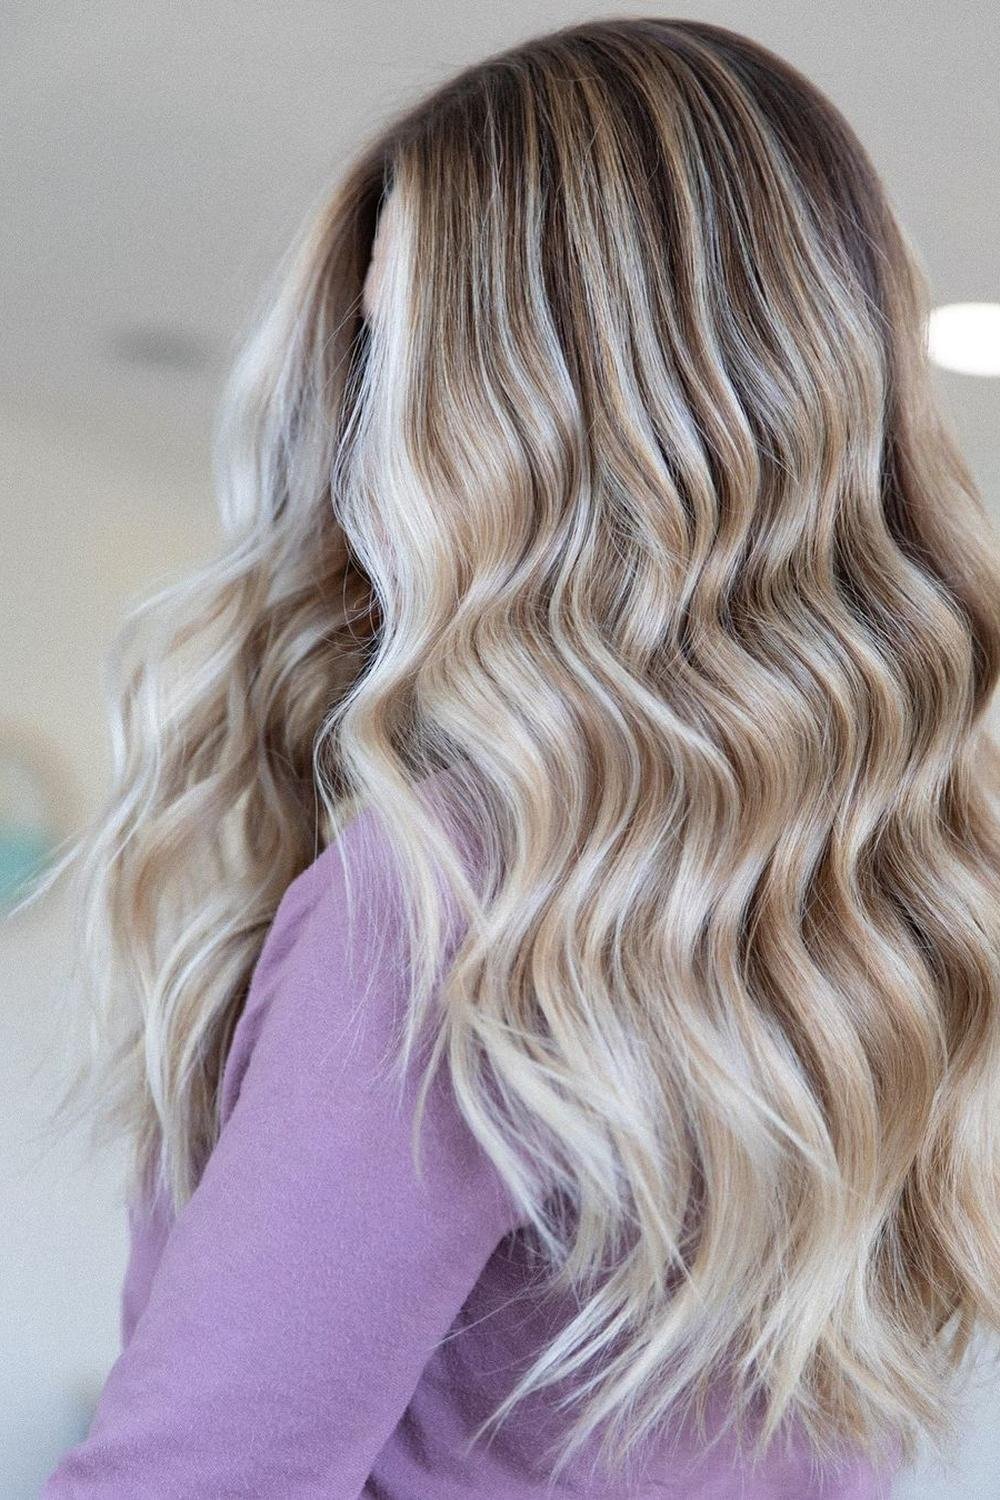 4 - Picture of Balayage Hairstyles